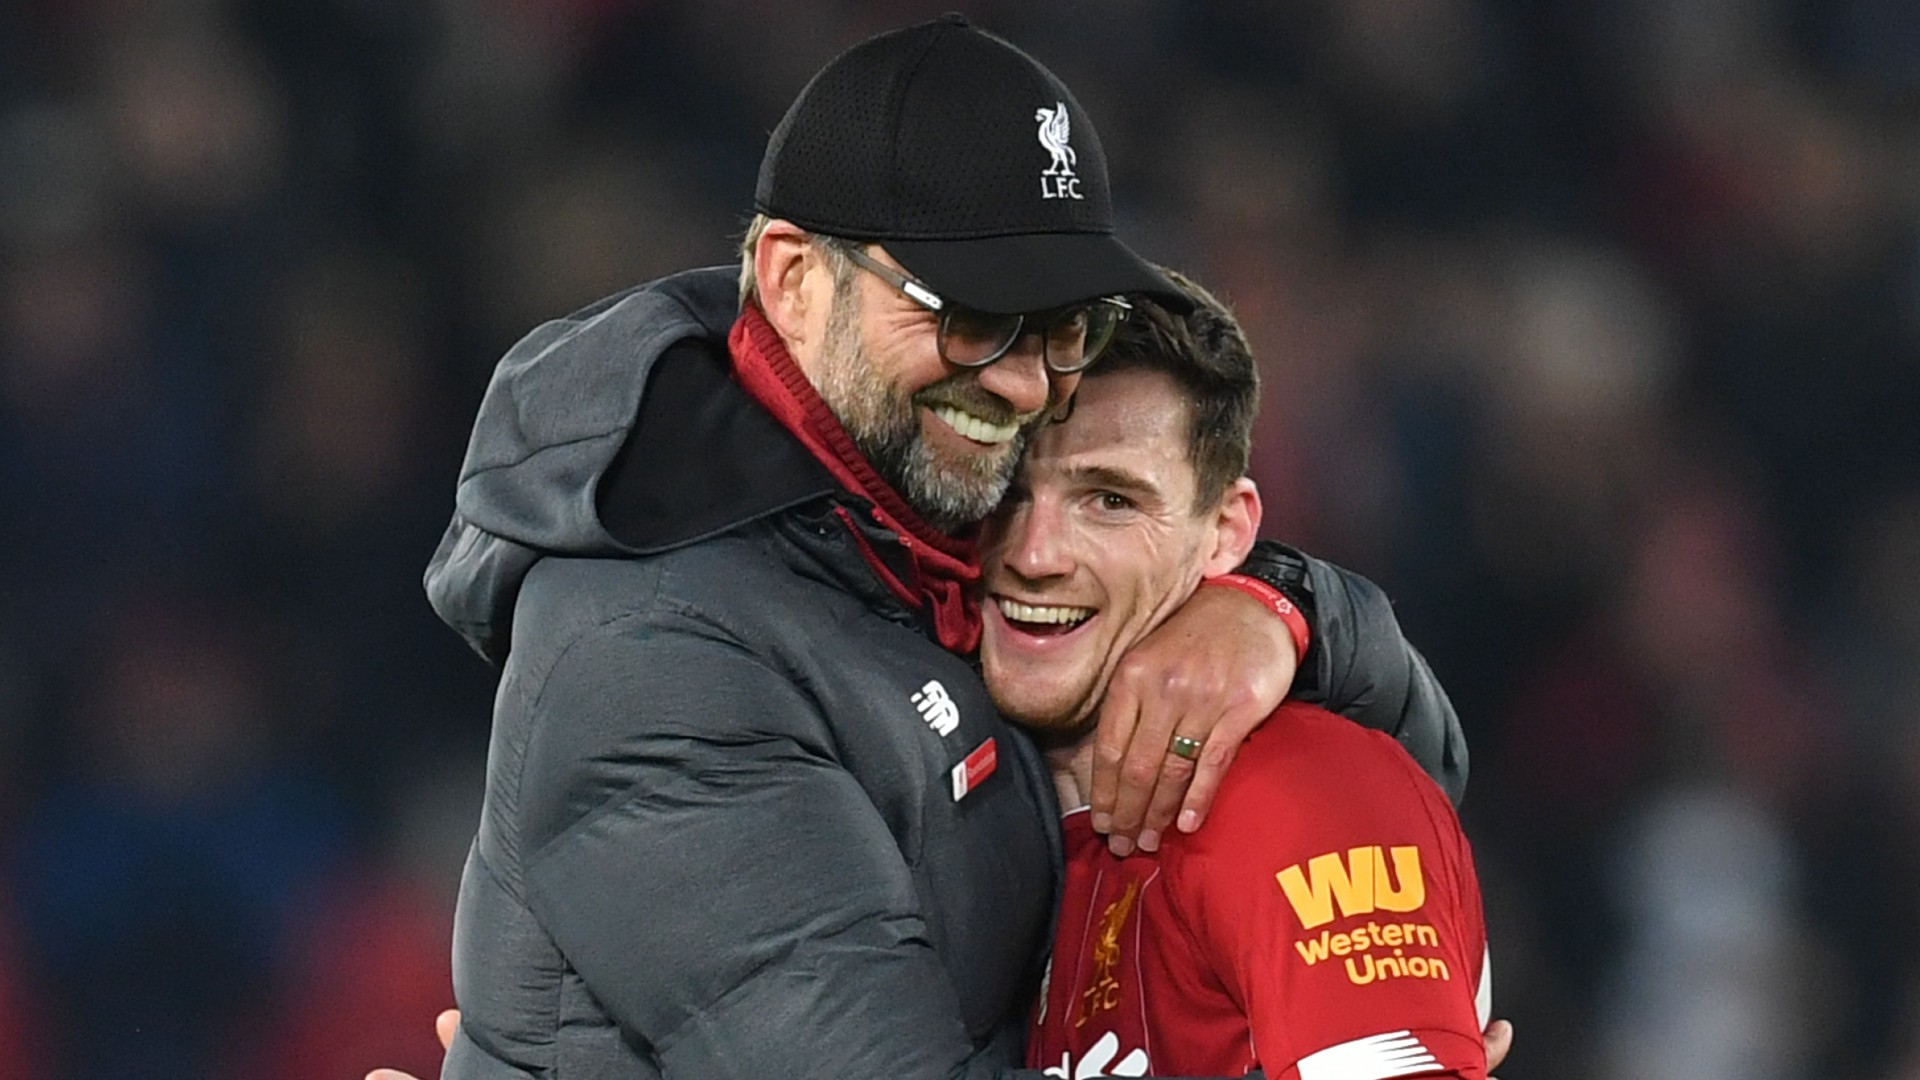 I like my players more than they like me, there are so many ‘hard decisions’ at Liverpool, says Klopp